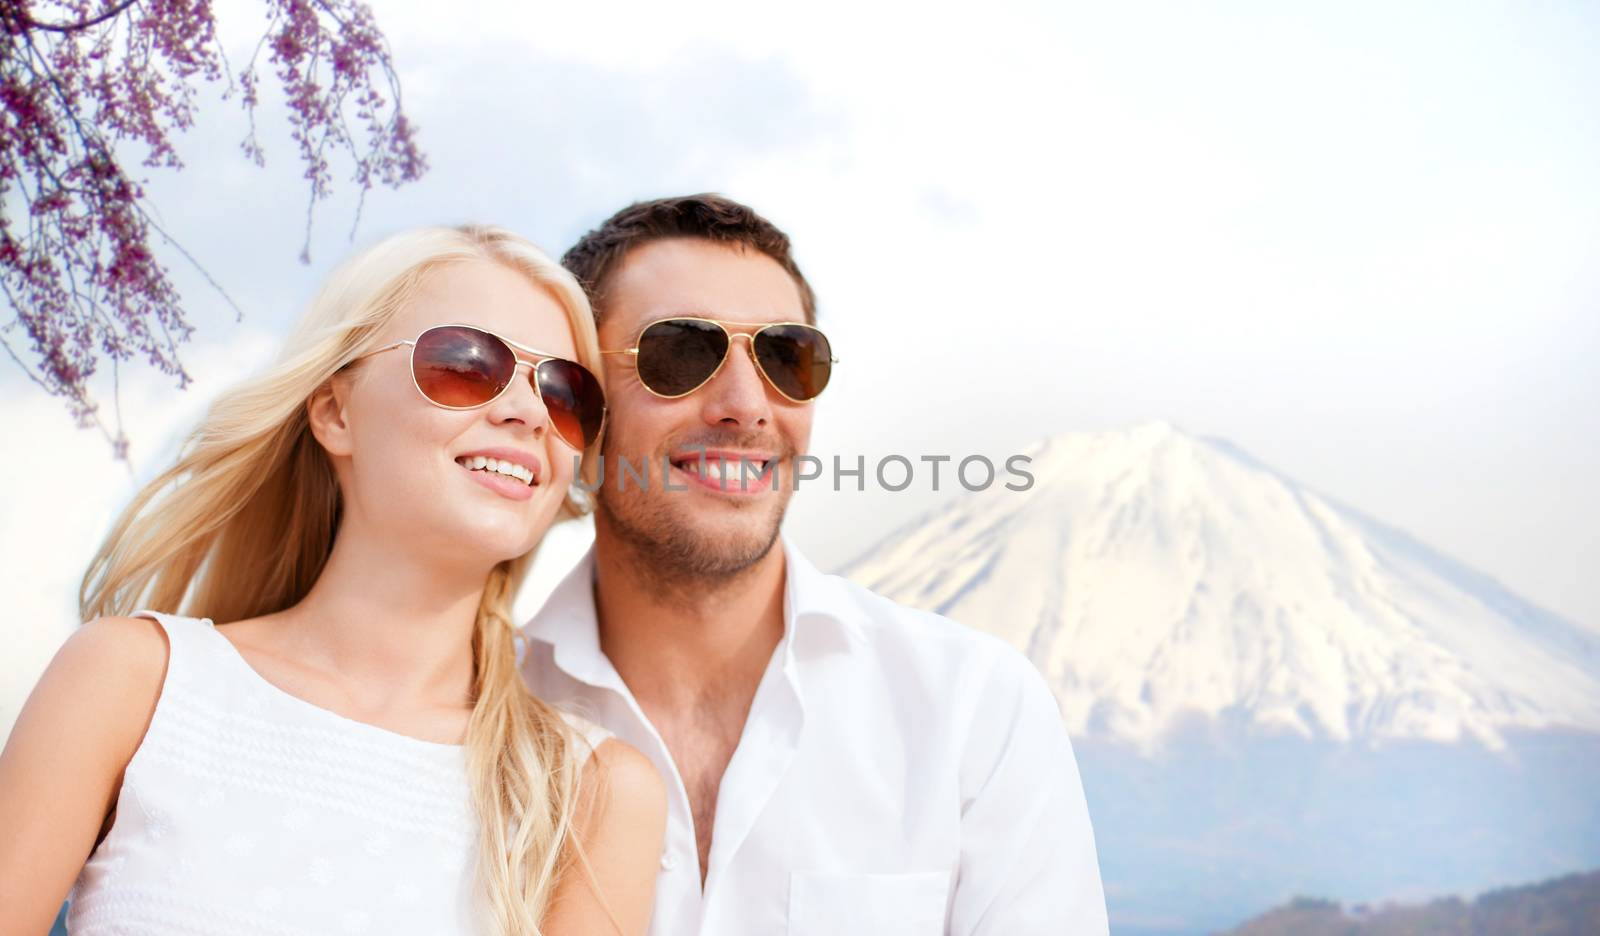 summer holidays and dating concept - couple in shades over fuji mountain background